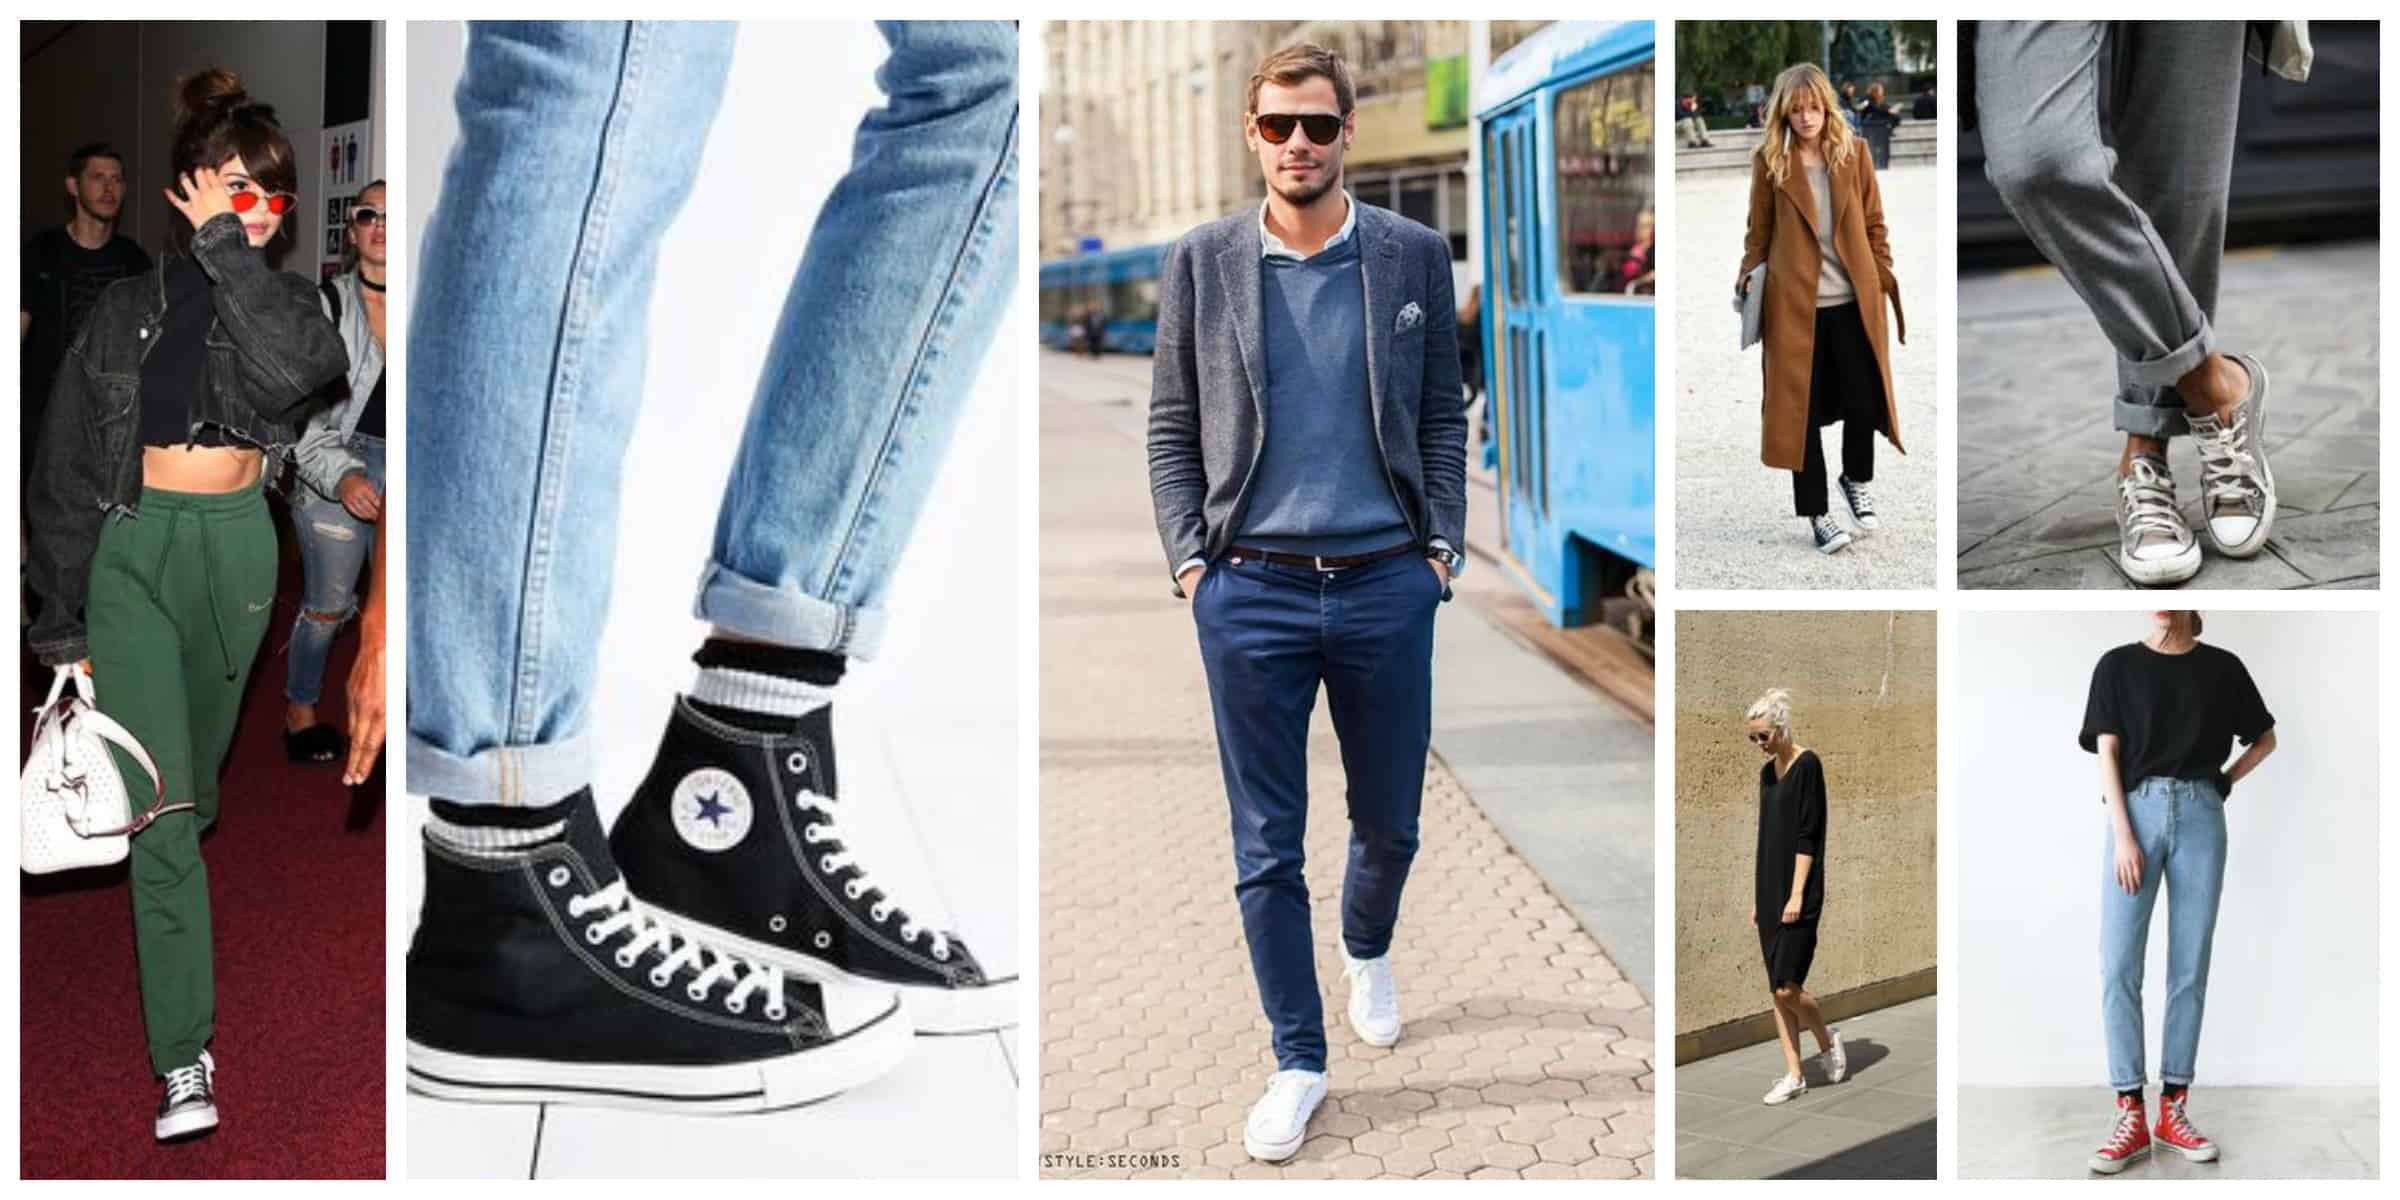 converse all star street style